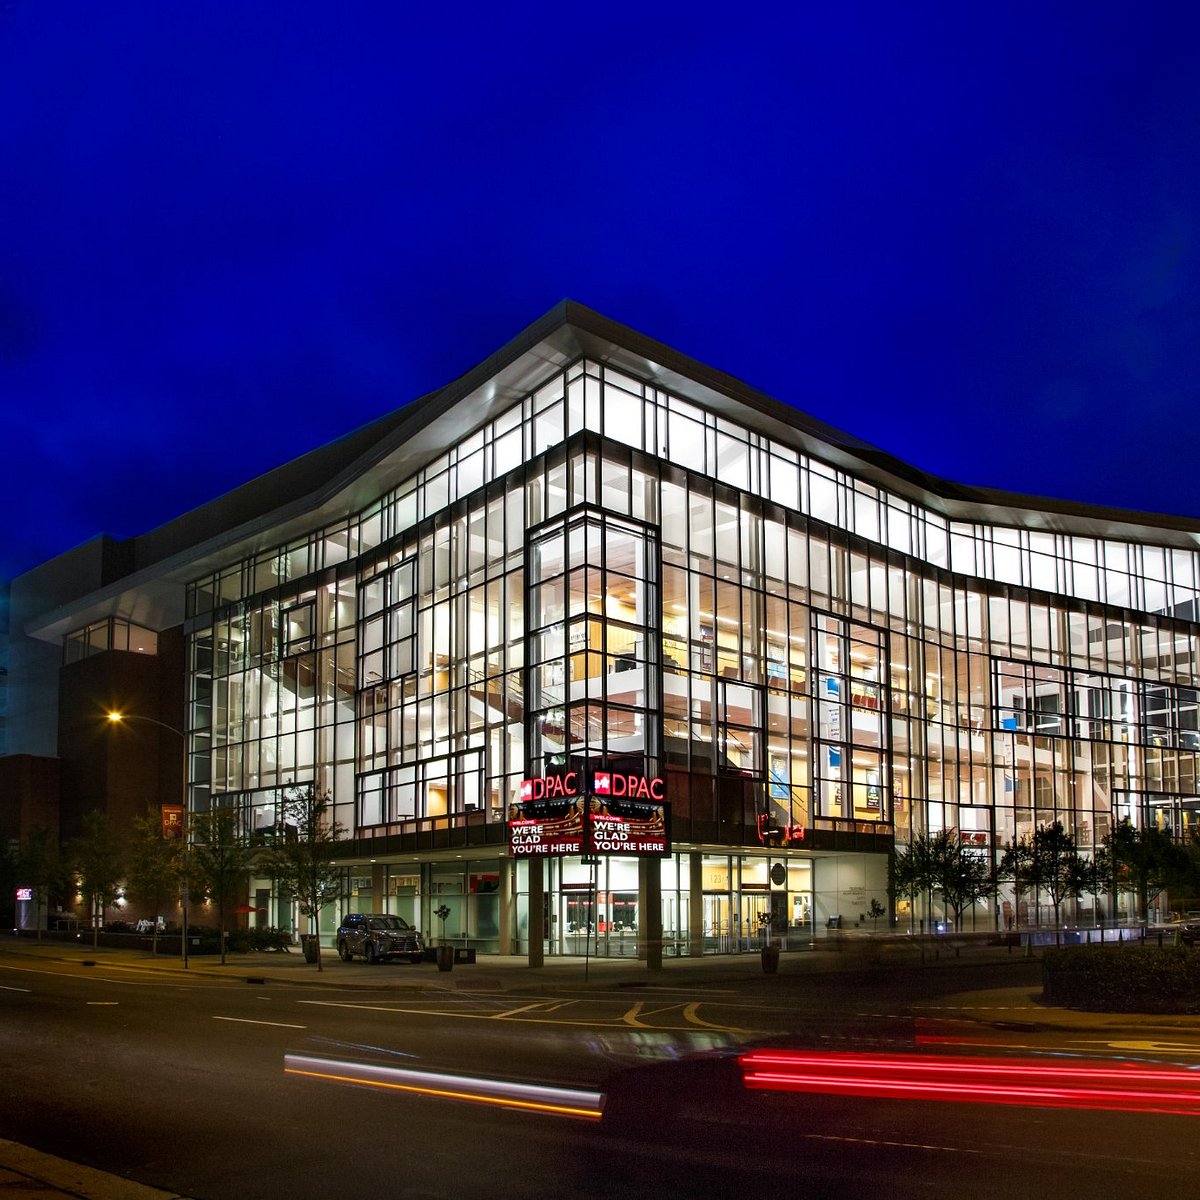 DPAC DURHAM PERFORMING ARTS CENTER All You Need to Know